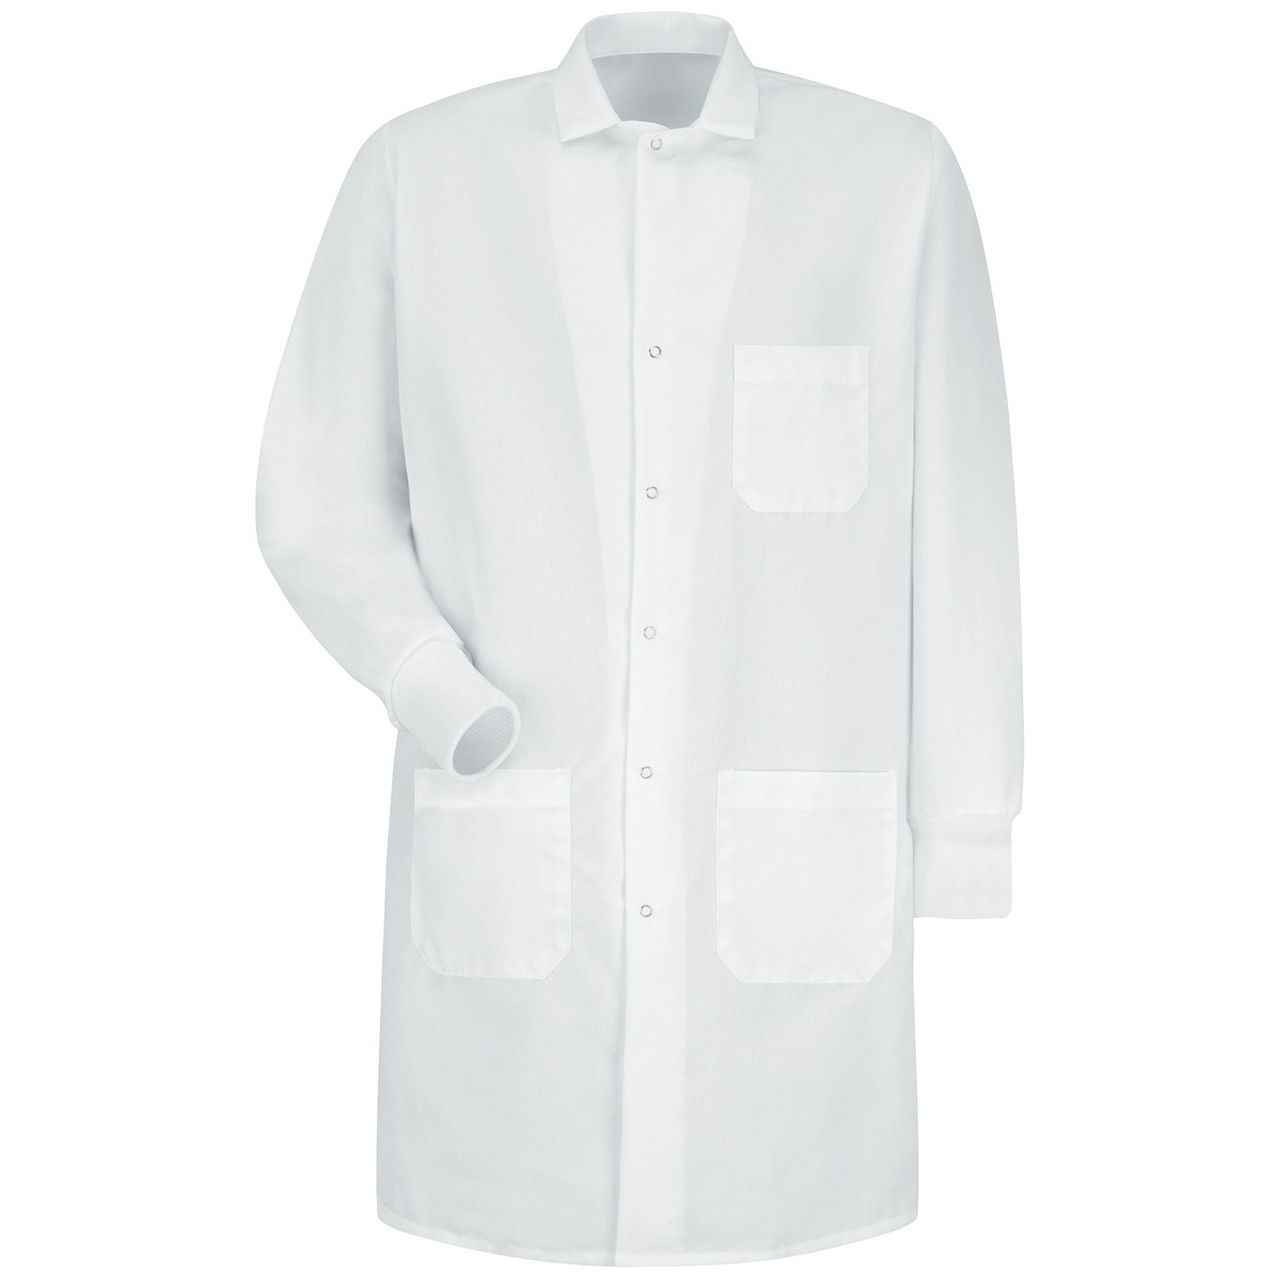 Is the lab coat with cuffed sleeves made of a specific material?